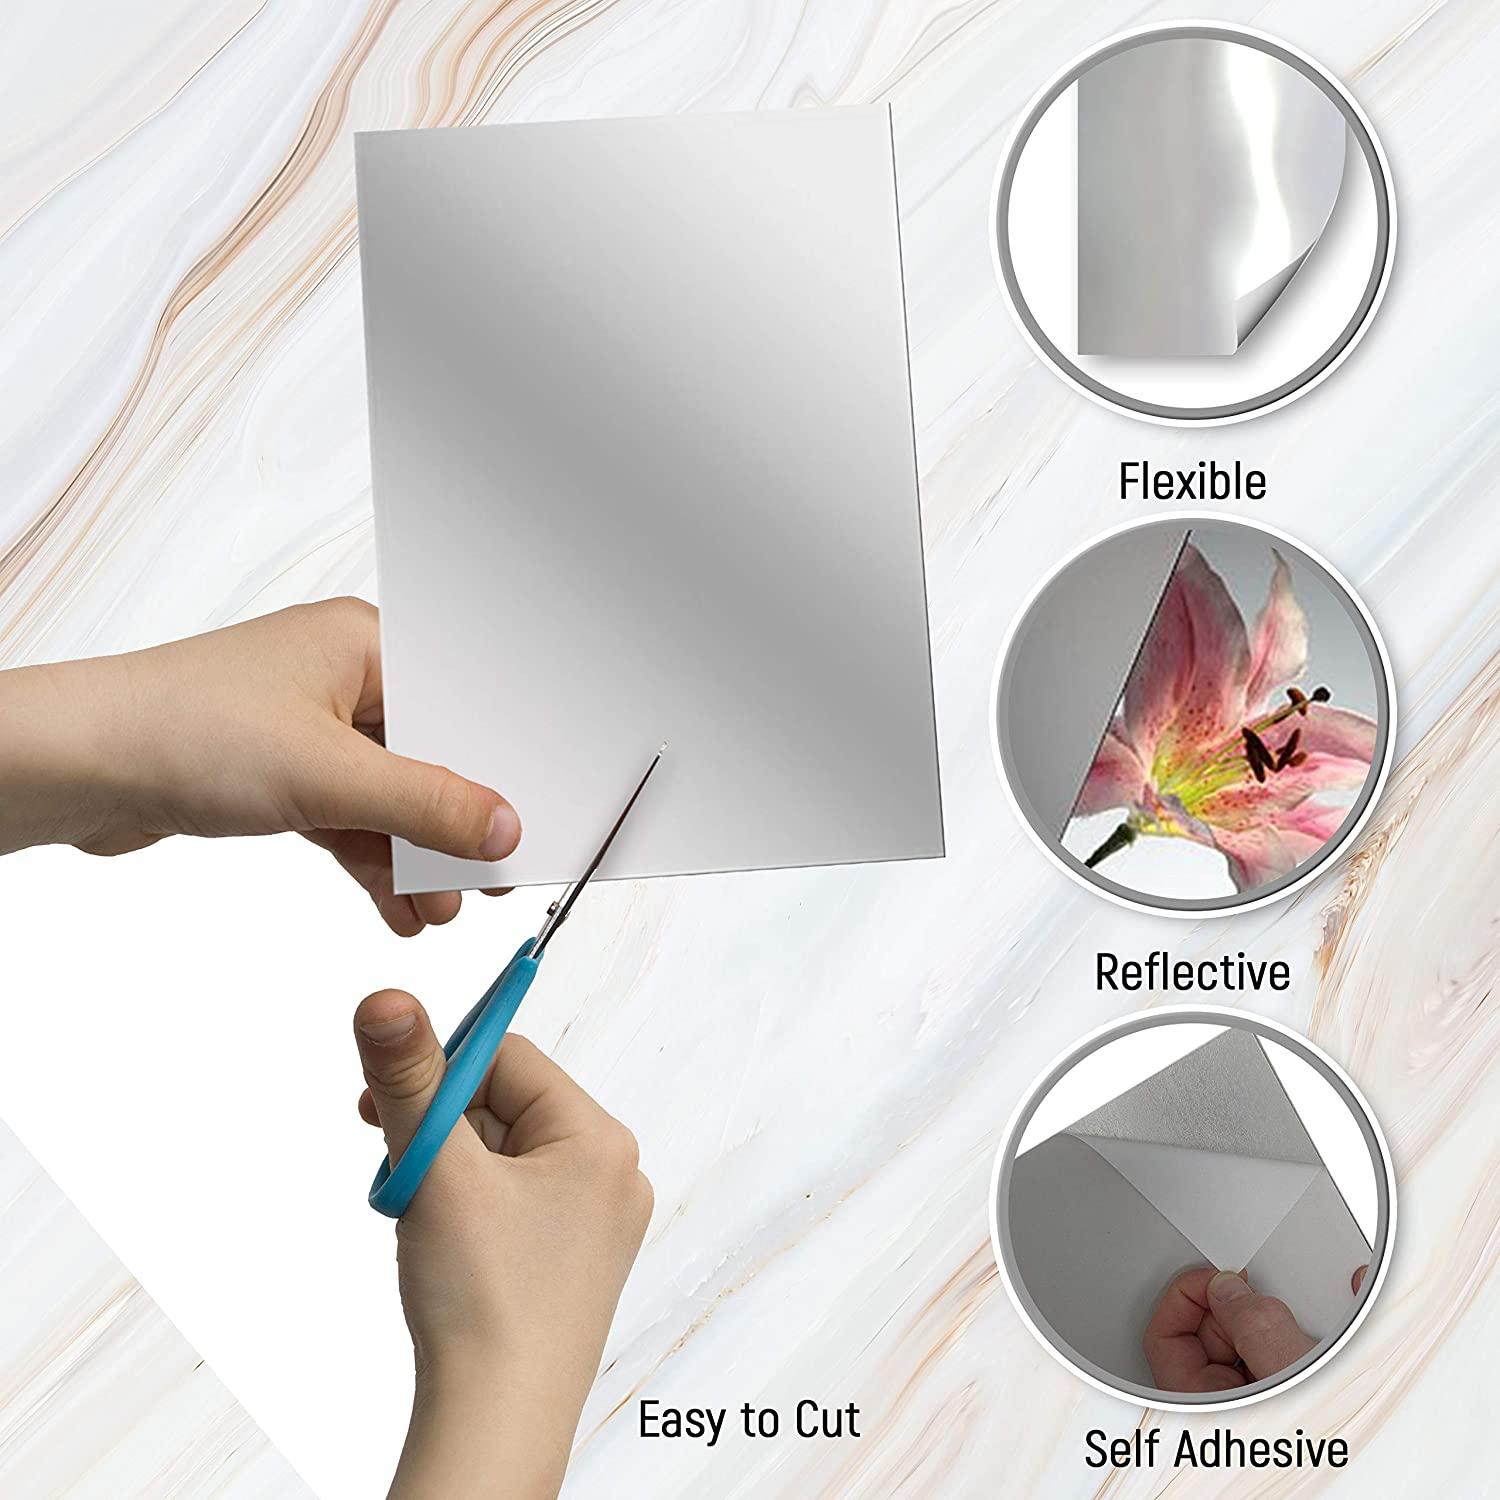 Quality Adhesive Mirror Sheet 6 x 9 Inches Flexible Mirrors Sheets,  Non-Glass Self Adhesive Stick on Mirror Tiles, Cut Mirror Stickers to Size, Peel  and Stick, Great for Crafts and Mirror Wall